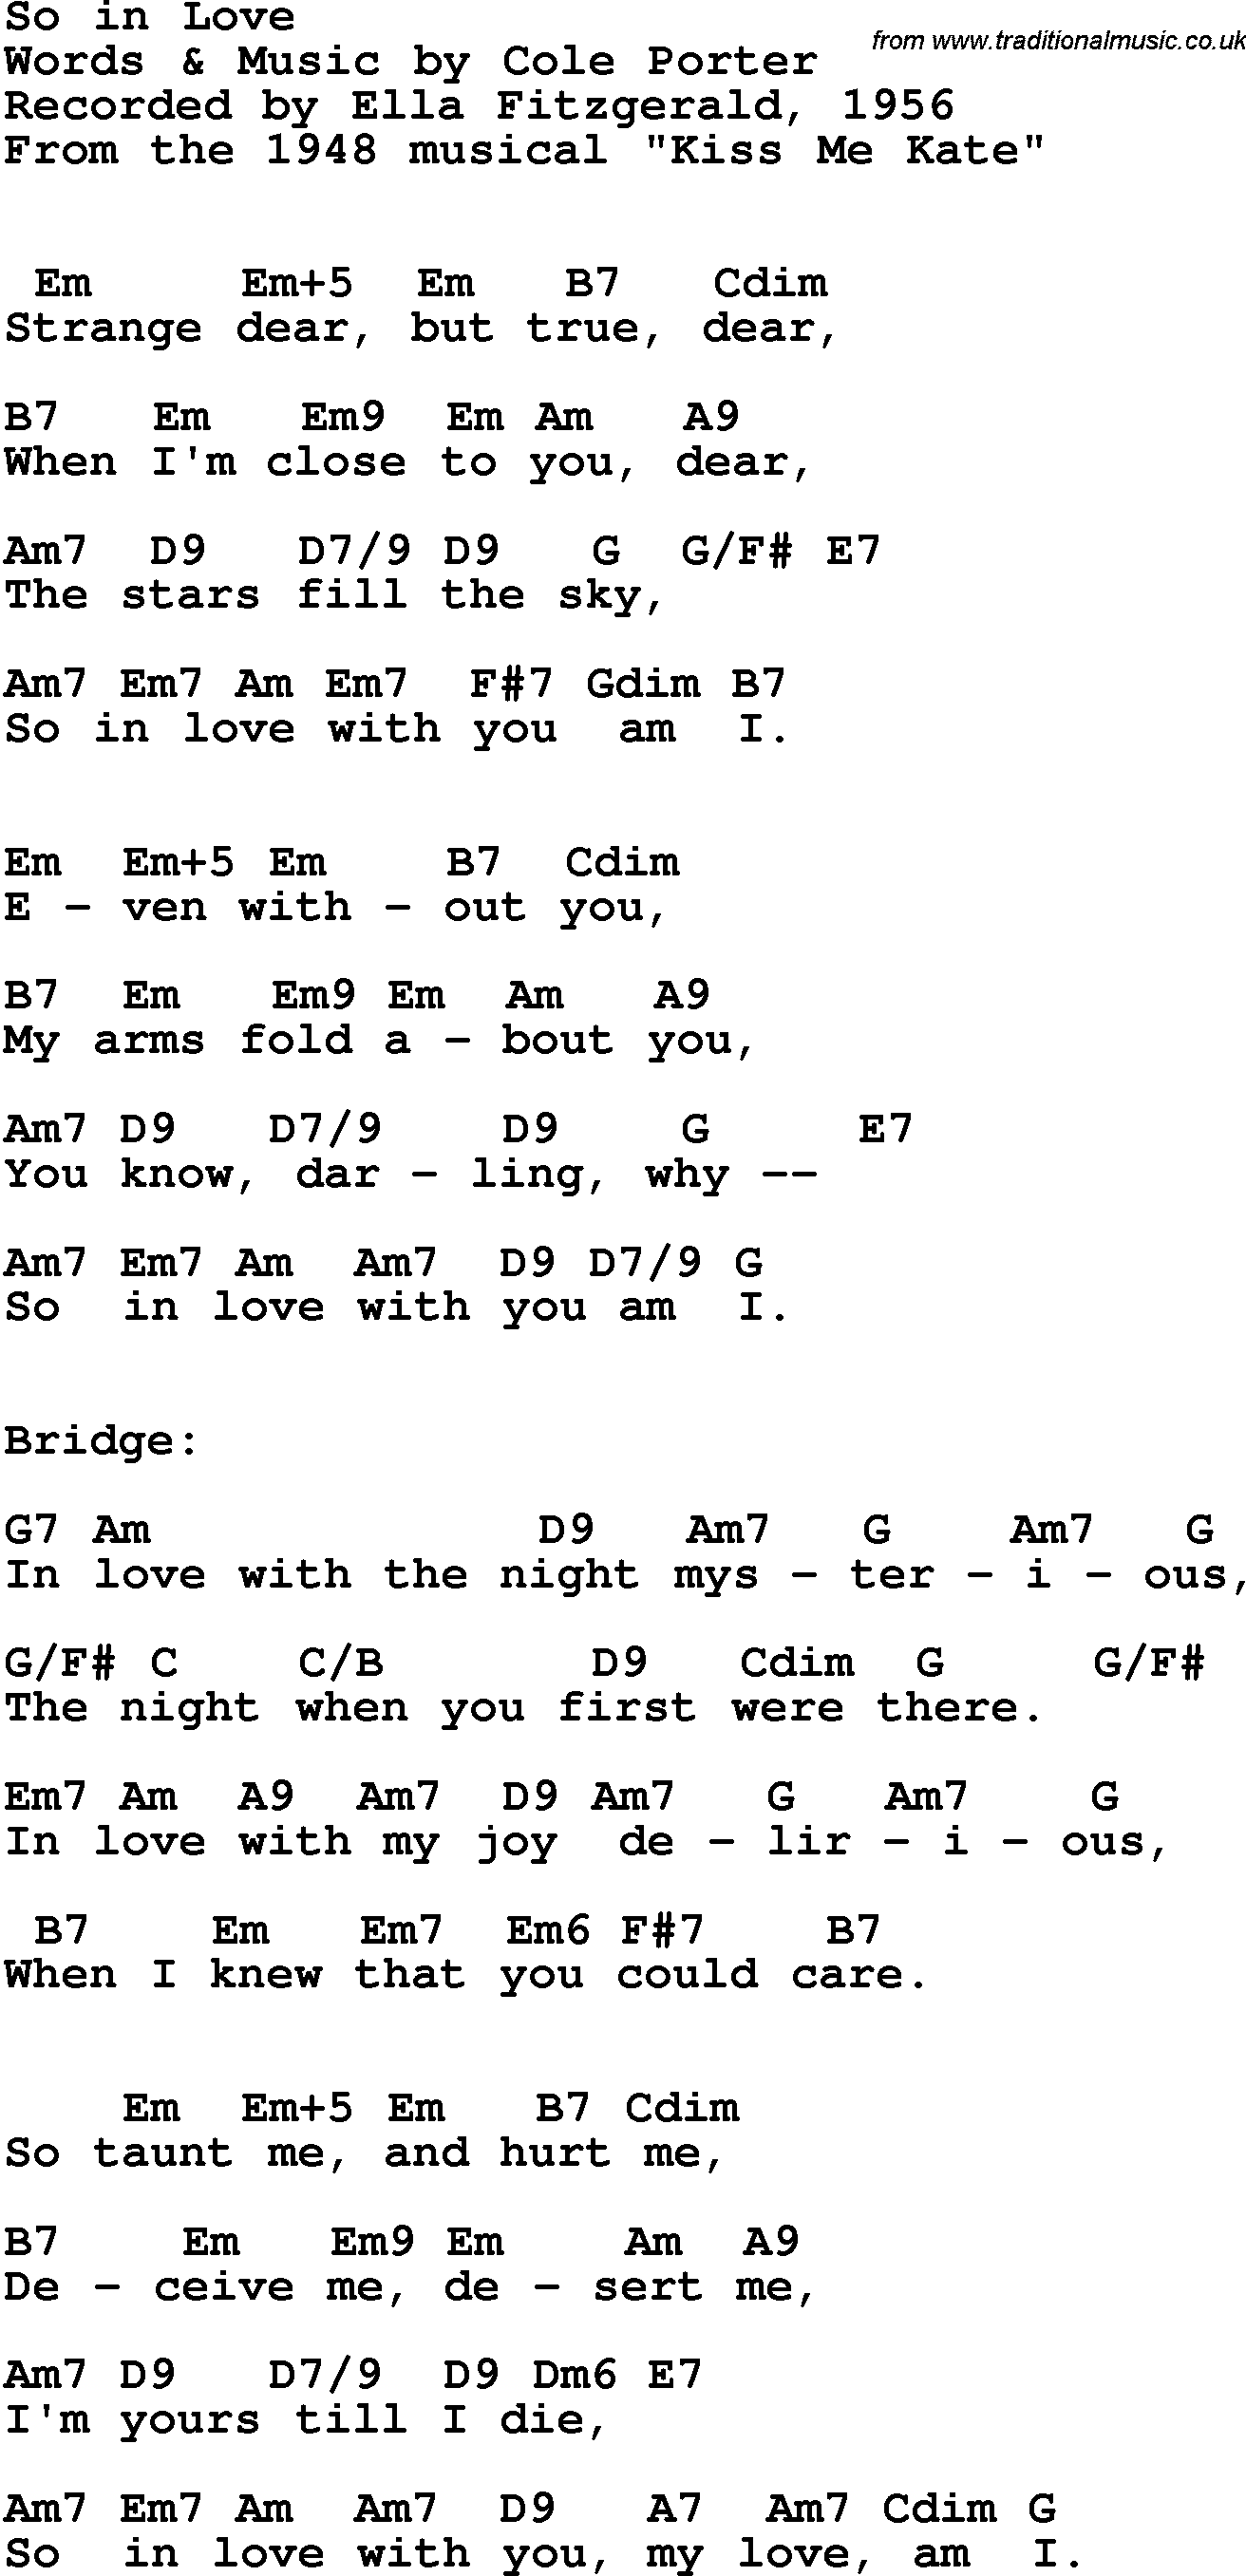 Song Lyrics with guitar chords for So In Love - Ella Fitzgerald, 1956